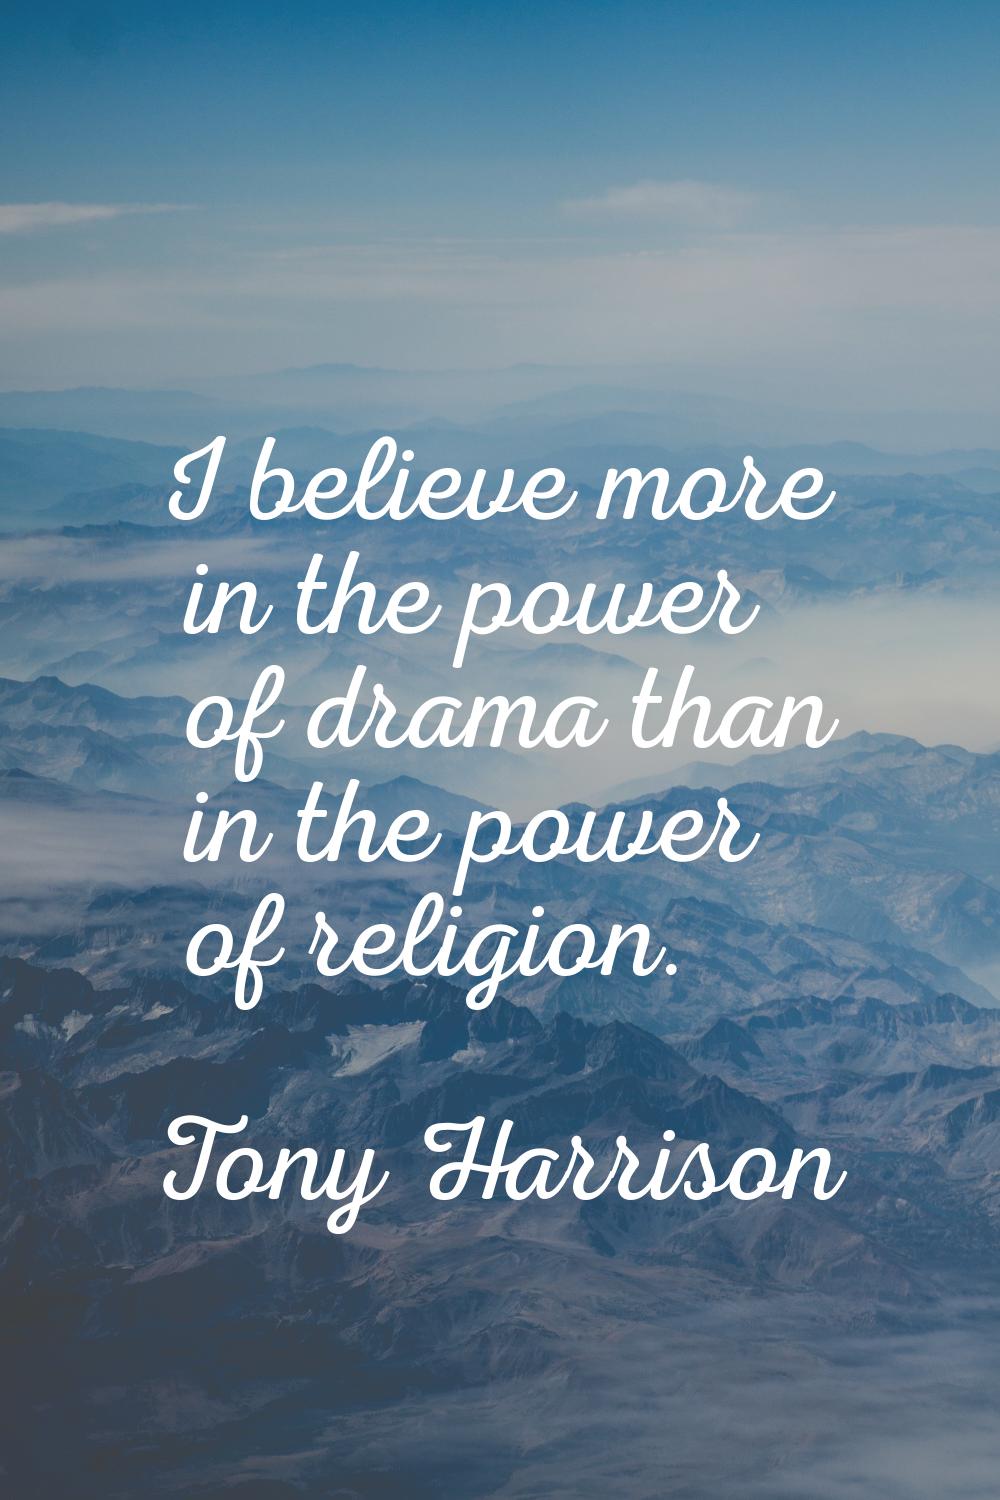 I believe more in the power of drama than in the power of religion.